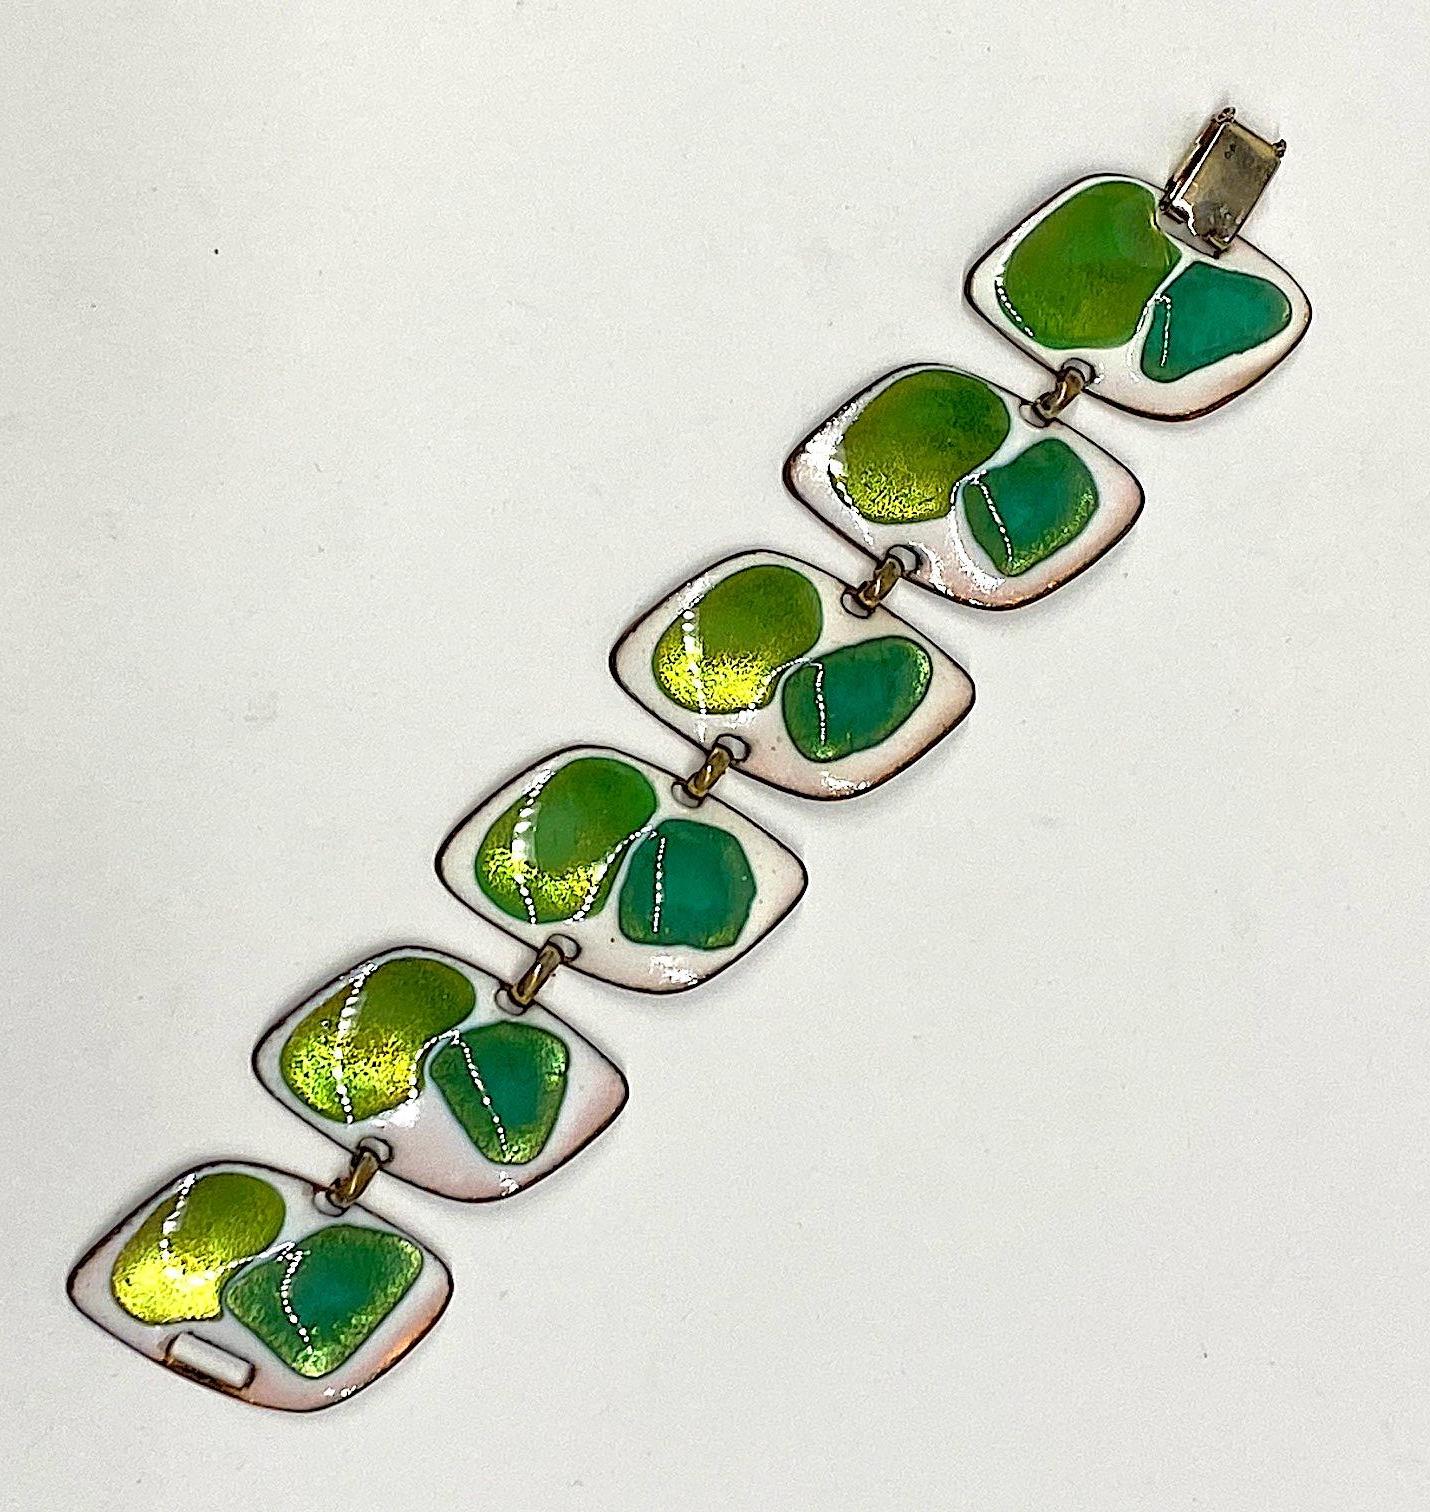 A bright and cheerful enamel bracelet from the 1960s by artisan Kay Denning. The bracelet measures 1.25 inches wide and 7.25 inches long. Each of the six links has a spot of irisescent green apple and a spot of grass green enamel on a background of